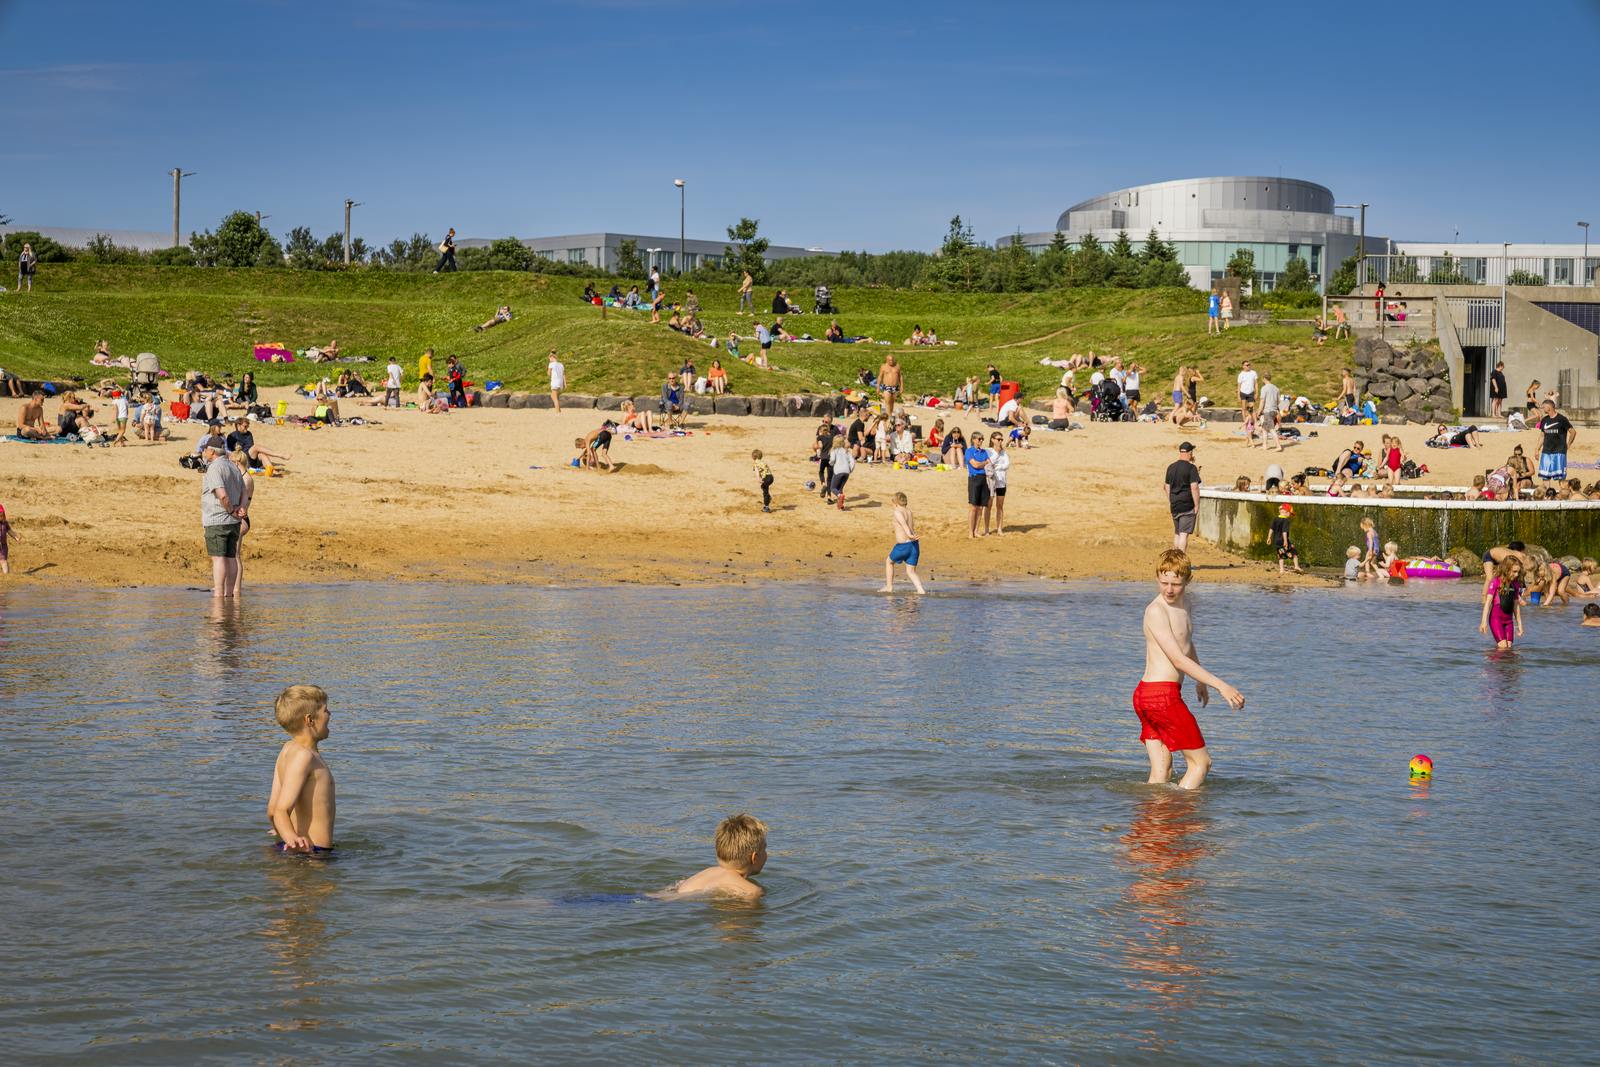 Nautholsvík beach on a summer day, children are swimming in the ocean, in the background there is a yellow sand beach with groups of people enjoying the sun